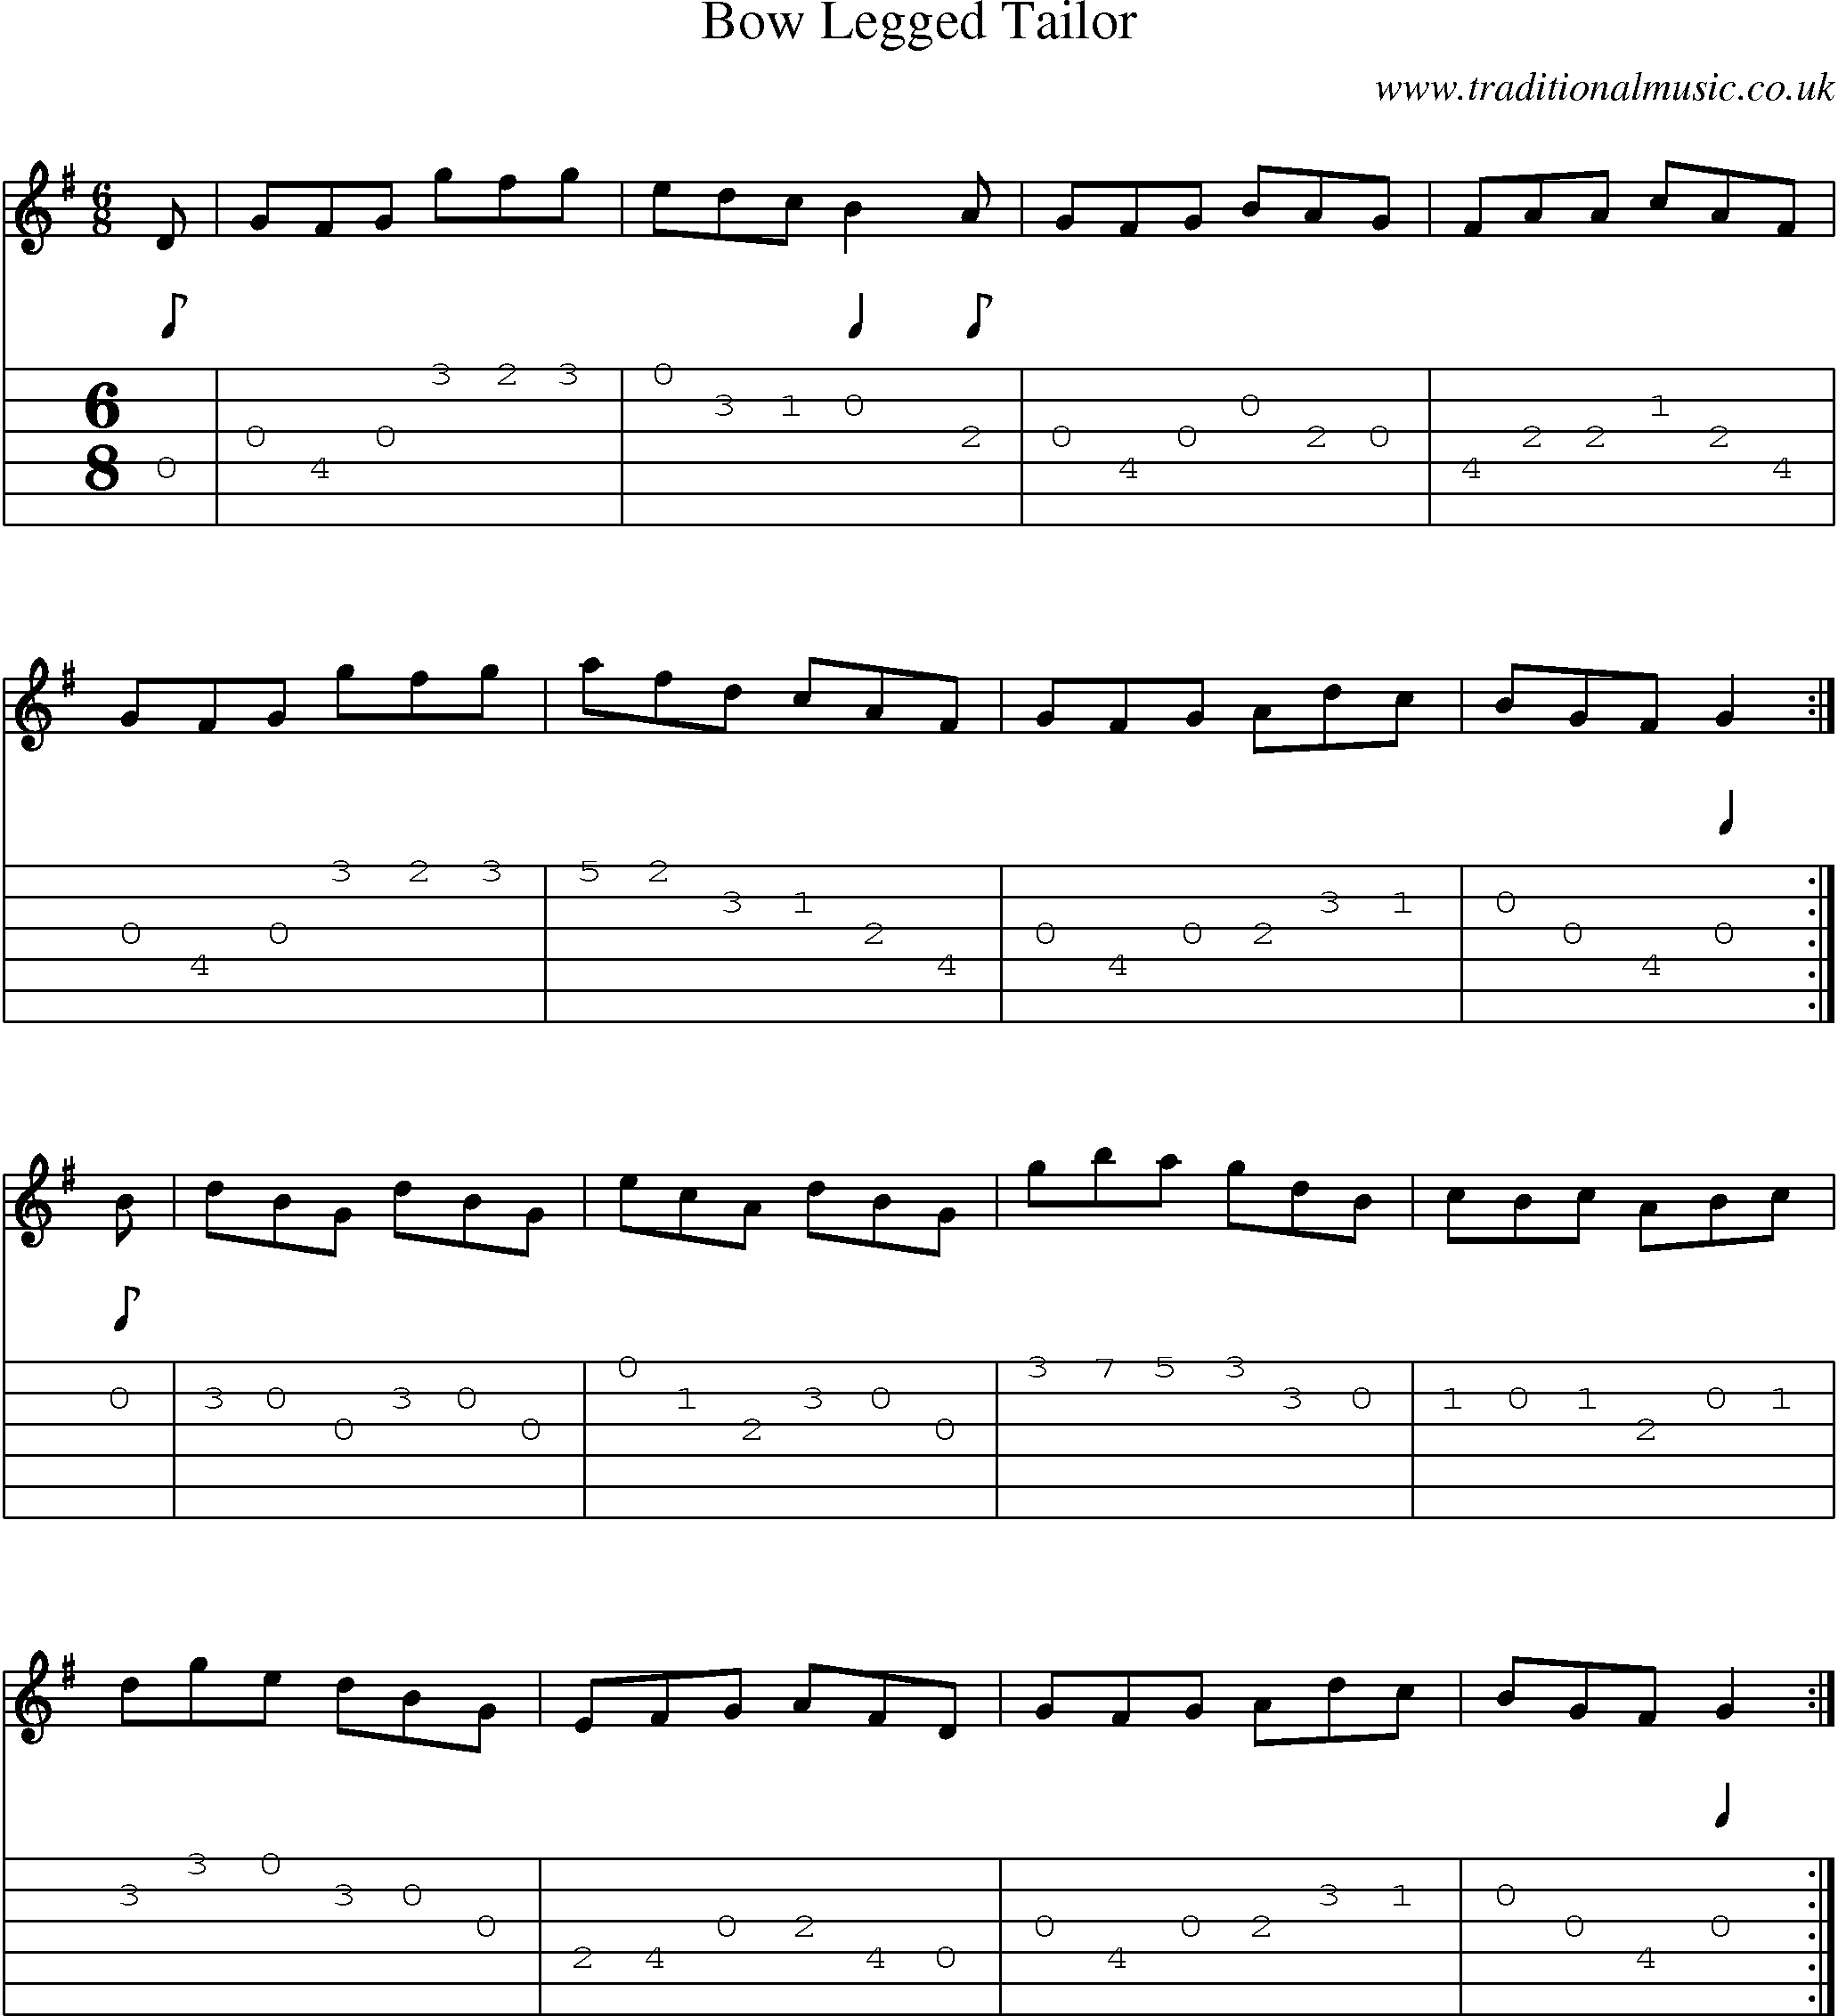 Music Score and Guitar Tabs for Bow Legged Tailor